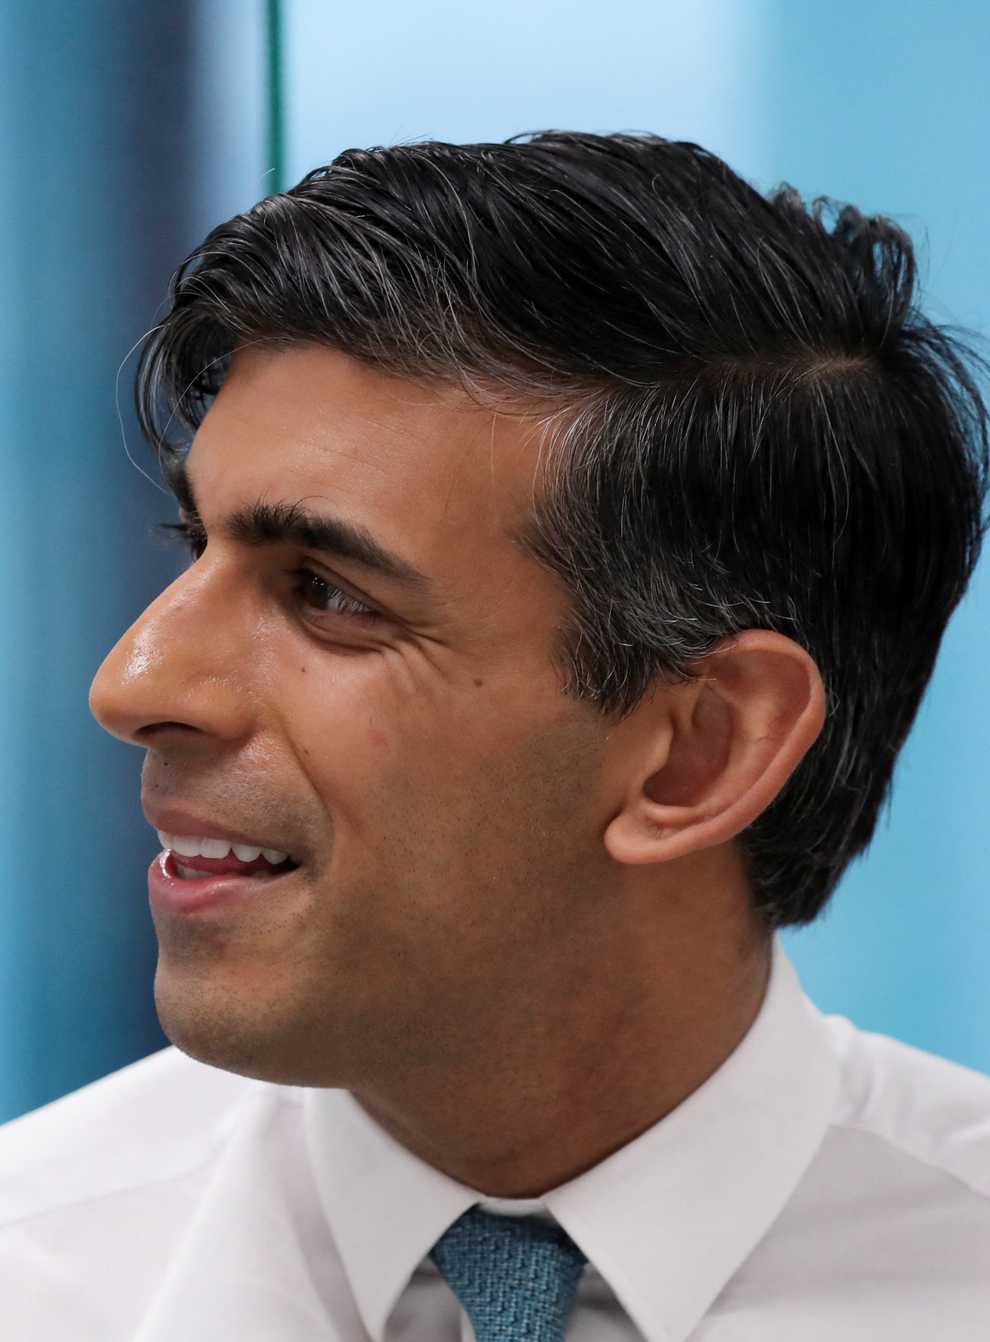 Rishi Sunak is to host a reception at Downing Street to mark Burns Night. (Scott Heppell/PA)